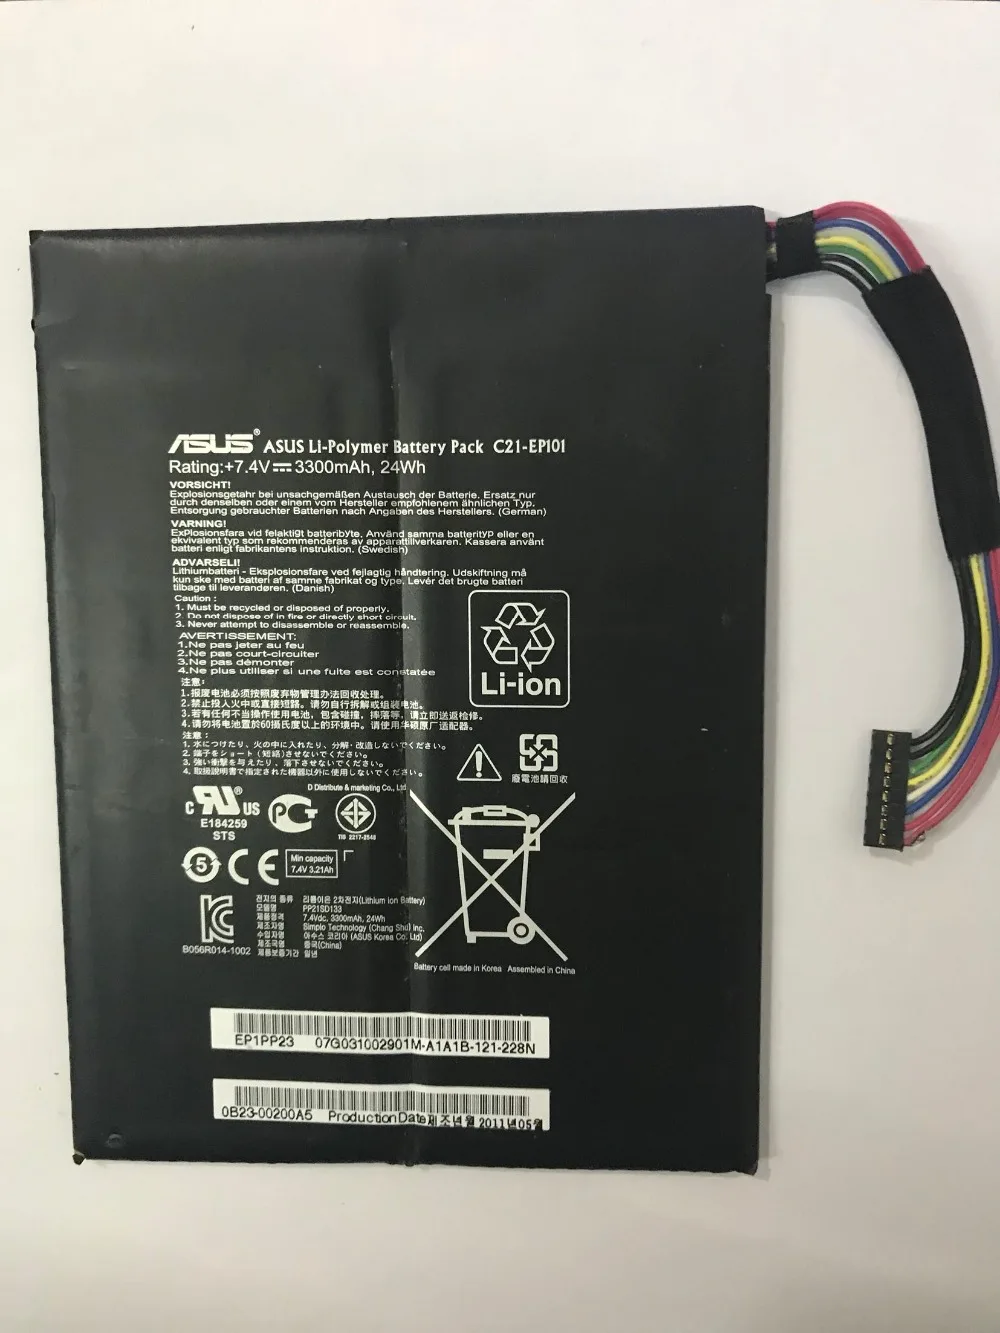 

New genuine tablet Battery for ASUS Eee Pad Transformer TF101 TR101 C21-EP101 7.4V 24WH